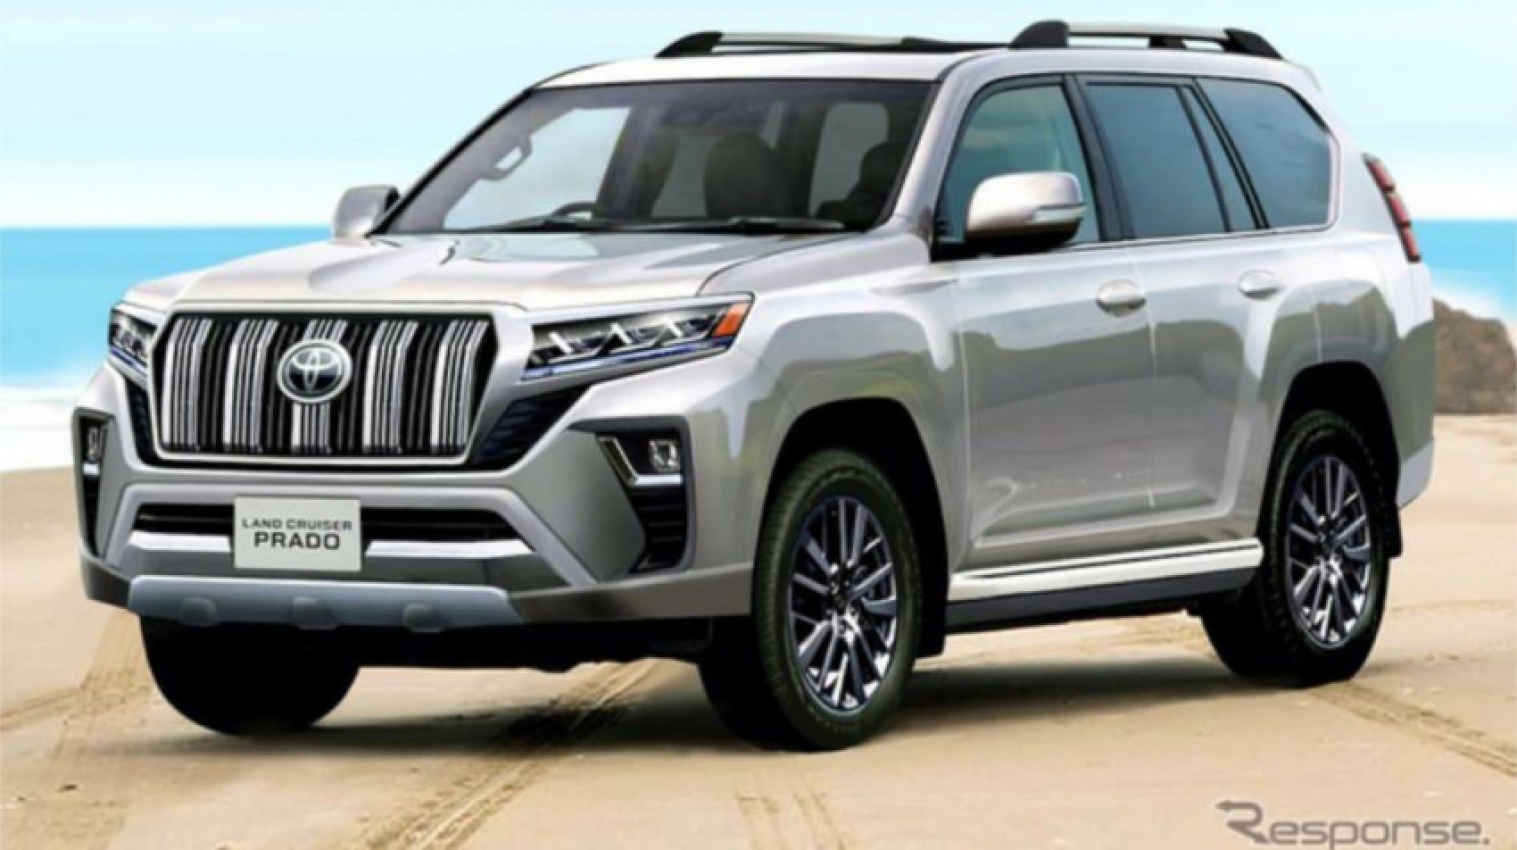 autos, cars, toyota, hybrid cars, industry news, showroom news, toyota land cruiser prado, toyota landcruiser prado 2022, toyota news, toyota suv range, 2023 toyota landcruiser prado won't be a new model! another facelift coming instead for lc300's 13-year-old baby brother: report